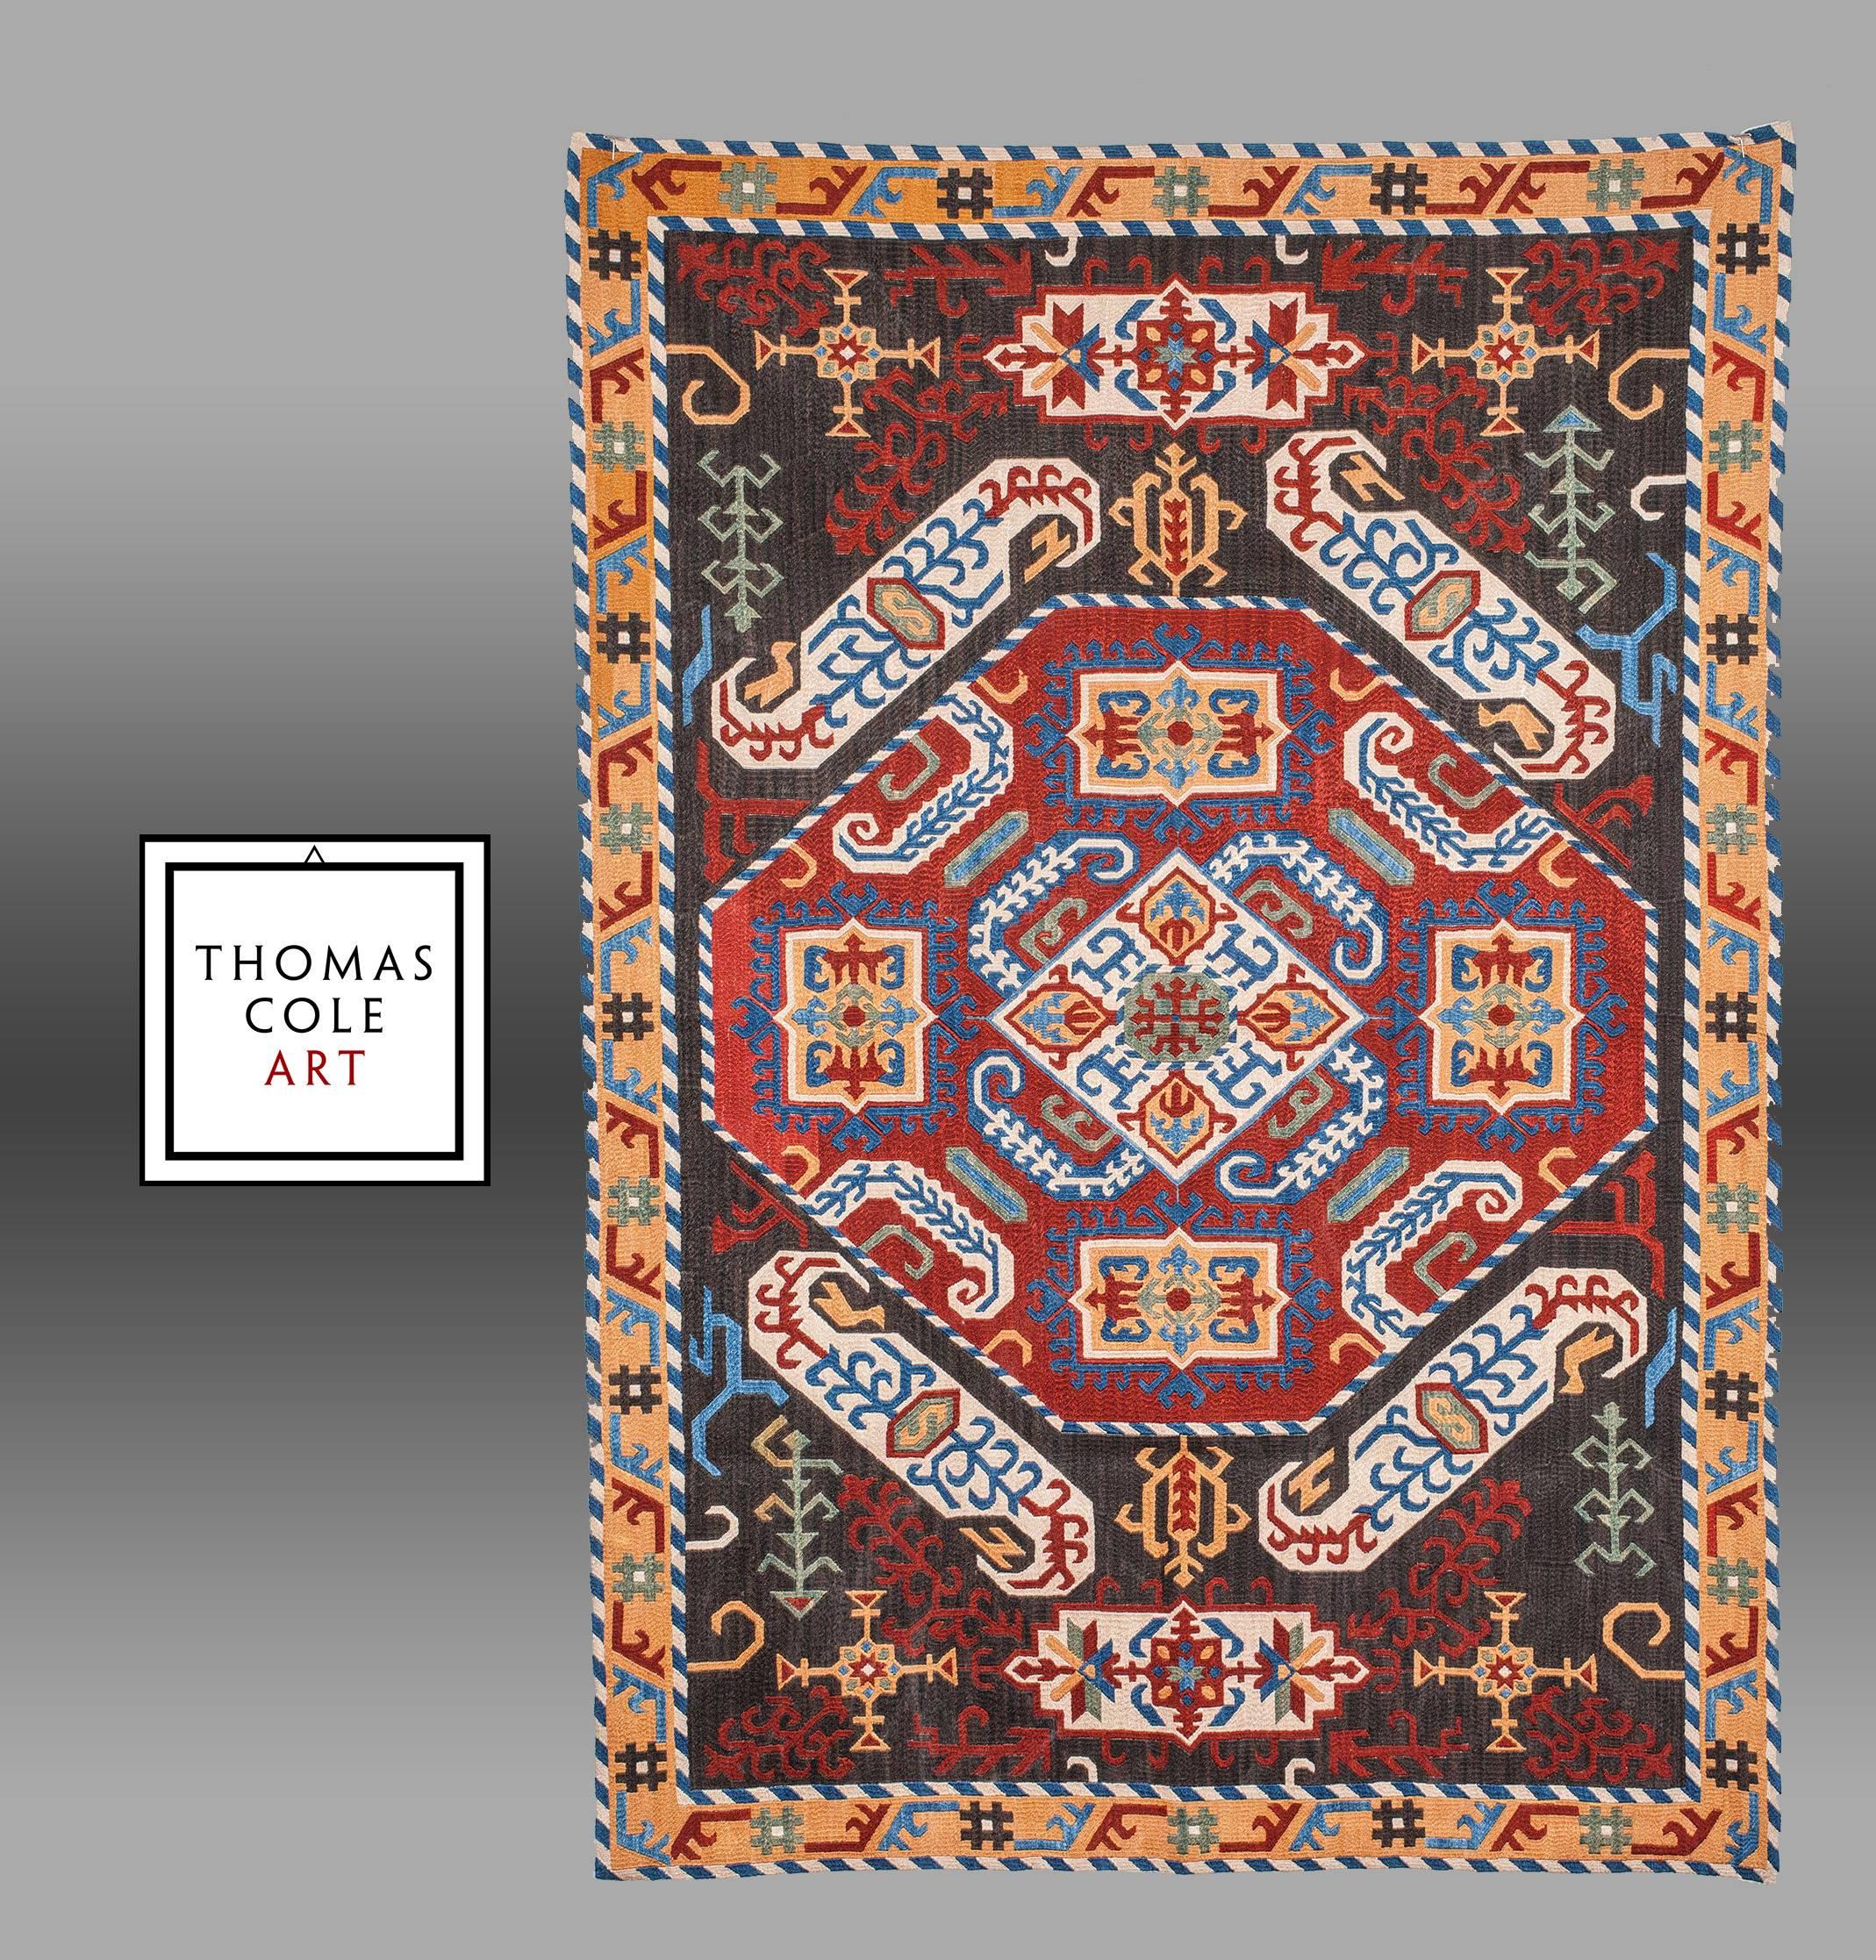 An incredibly beautiful embroidery, made in Armenia in an old style mimicking both designs and the colors of older Ottoman era textile art from the region.

The embroidery consists of pure silk thread embroidery on a cotton ground cloth. All the